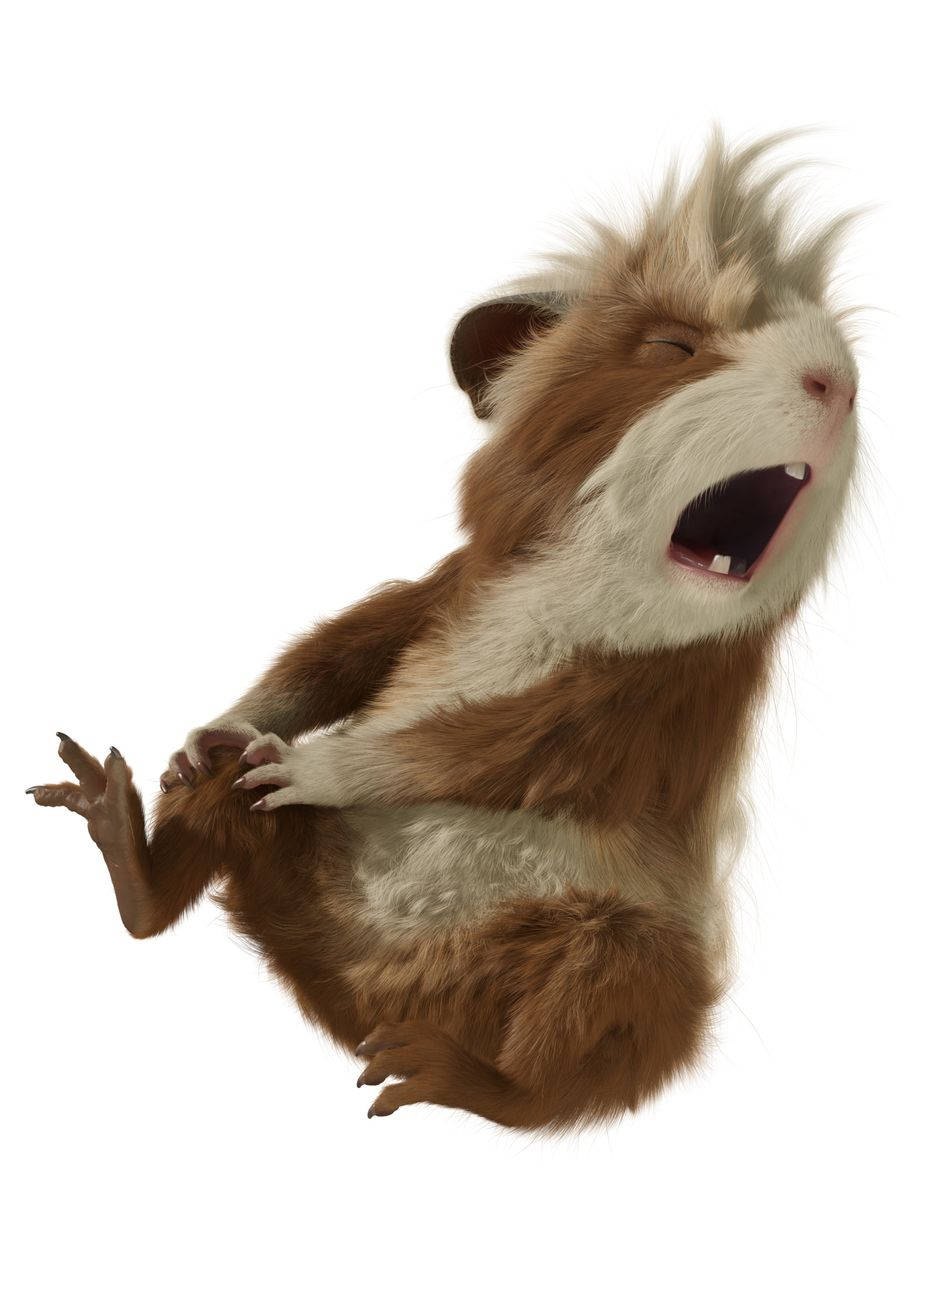 "Agent Hurley - The Plucky Hamster of G Force" Wallpaper